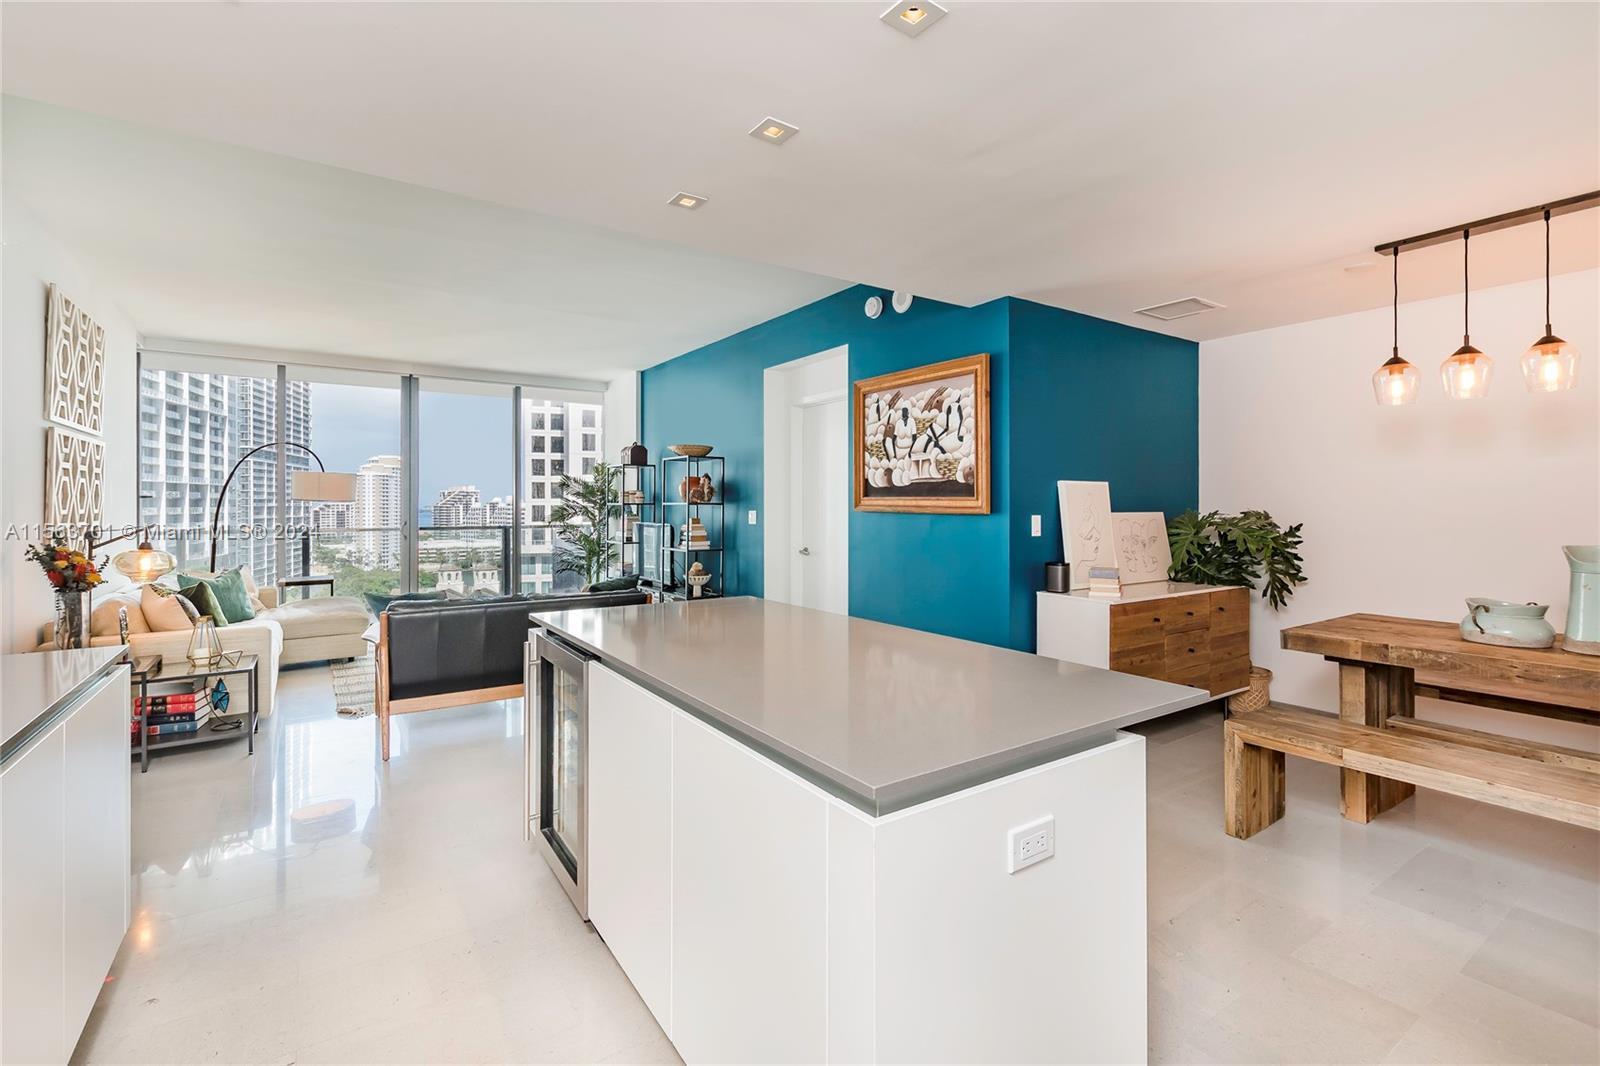 Welcome to this spacious 2 bed 2.5 bath, 1,400 SF Unit in the heart of Brickell. This property is tu